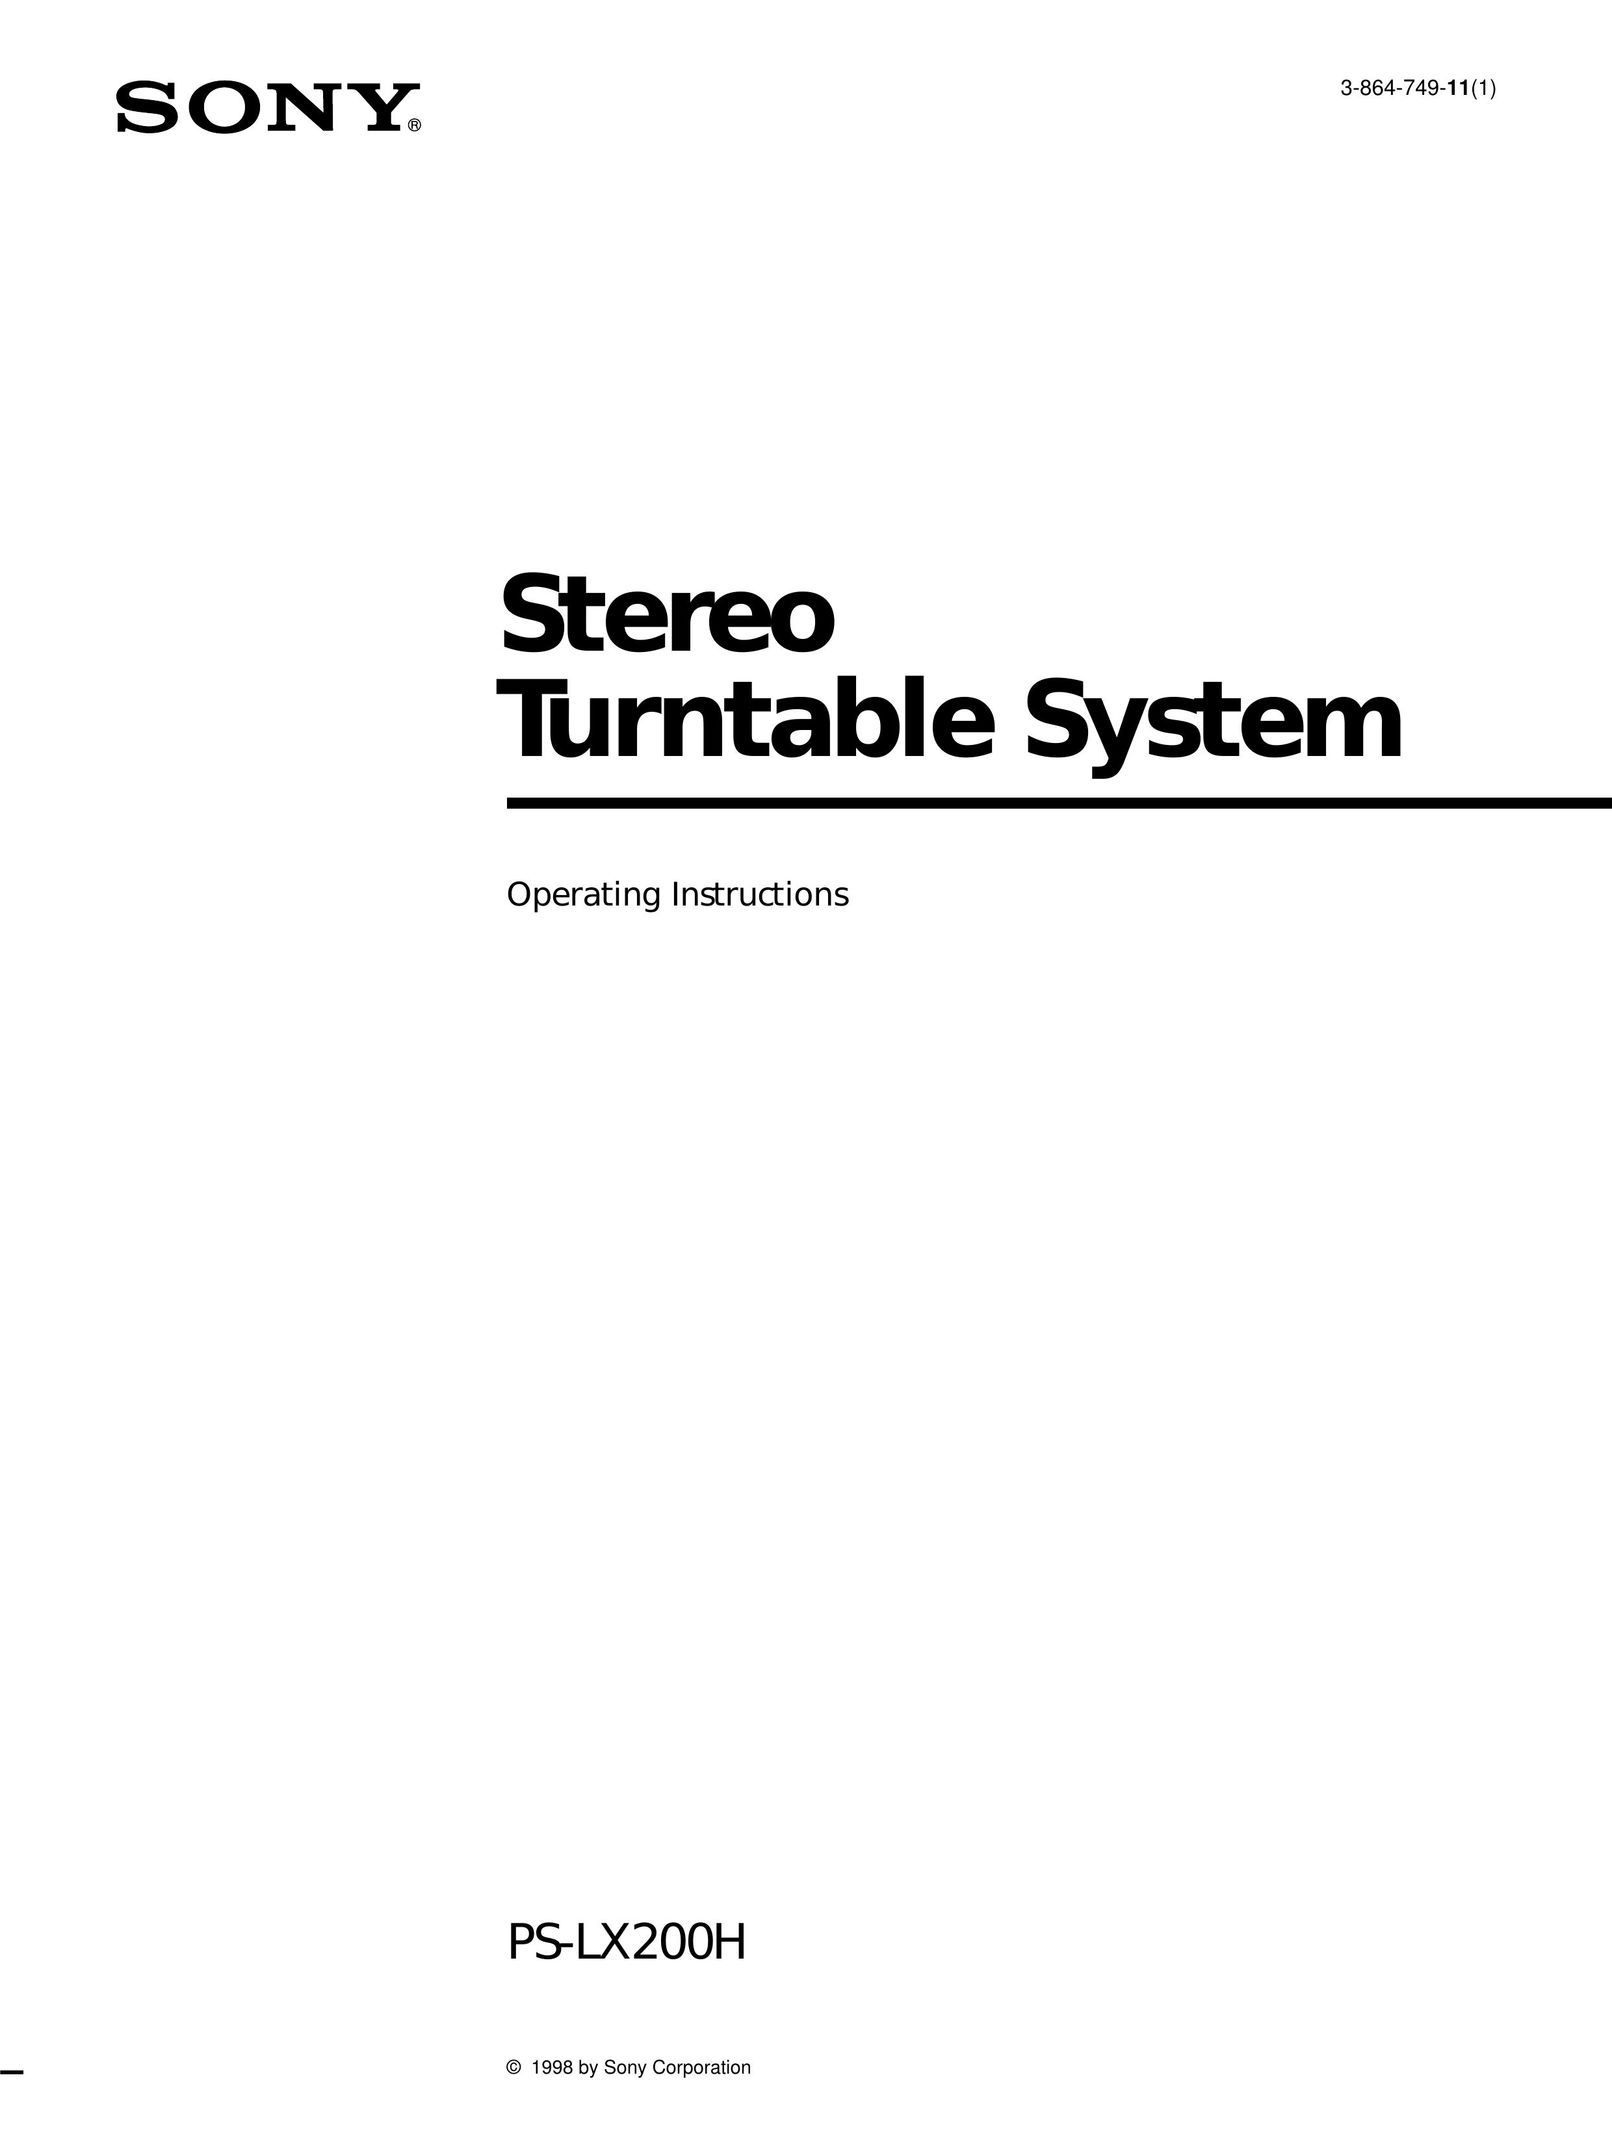 Sony PS-LX200H Turntable User Manual